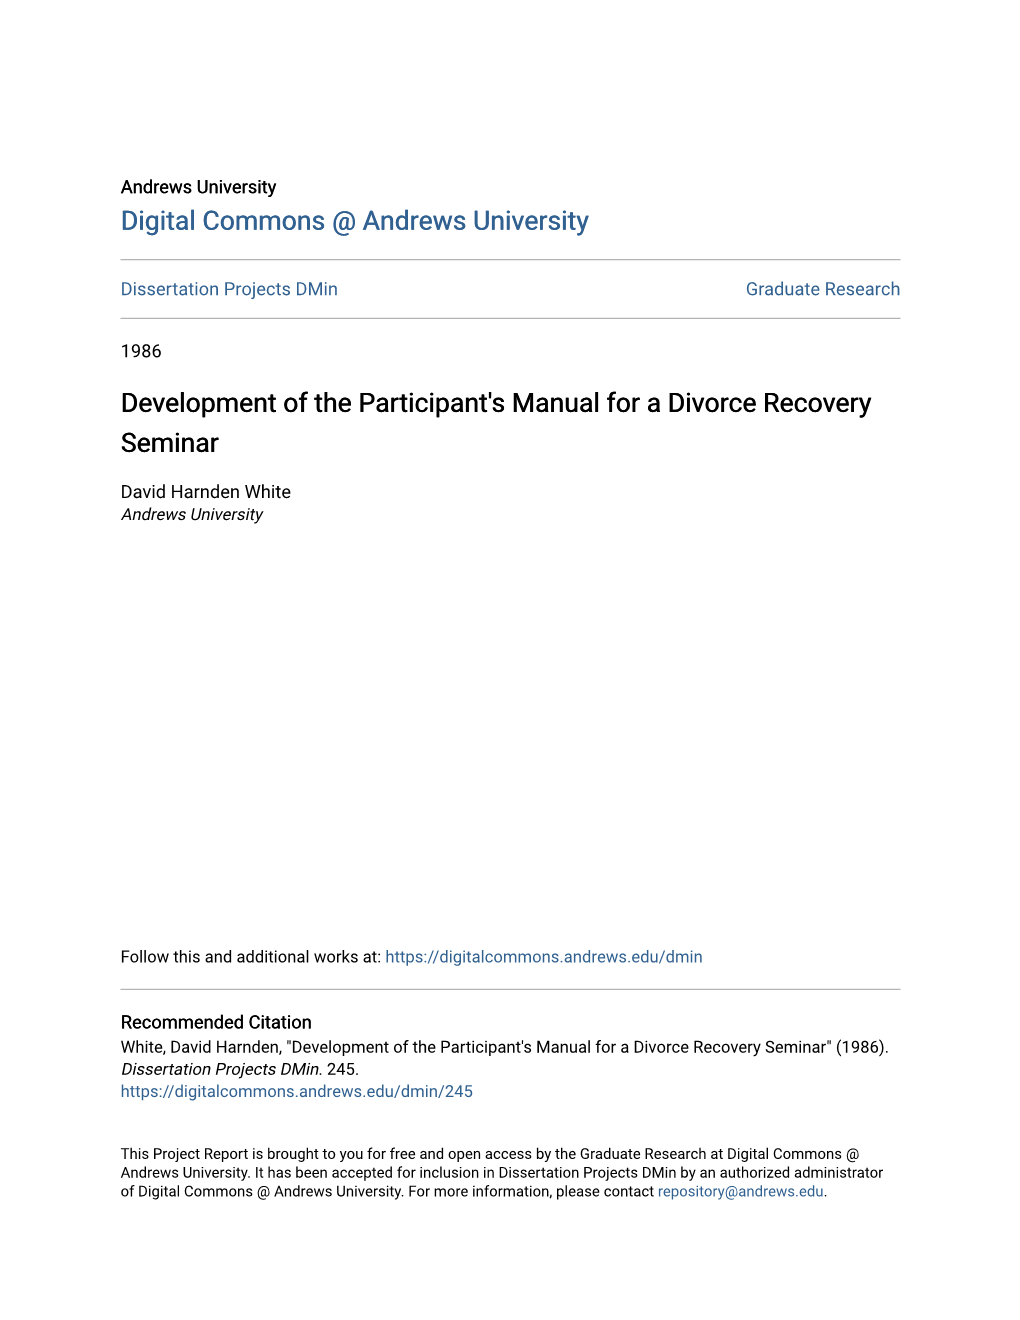 Development of the Participant's Manual for a Divorce Recovery Seminar